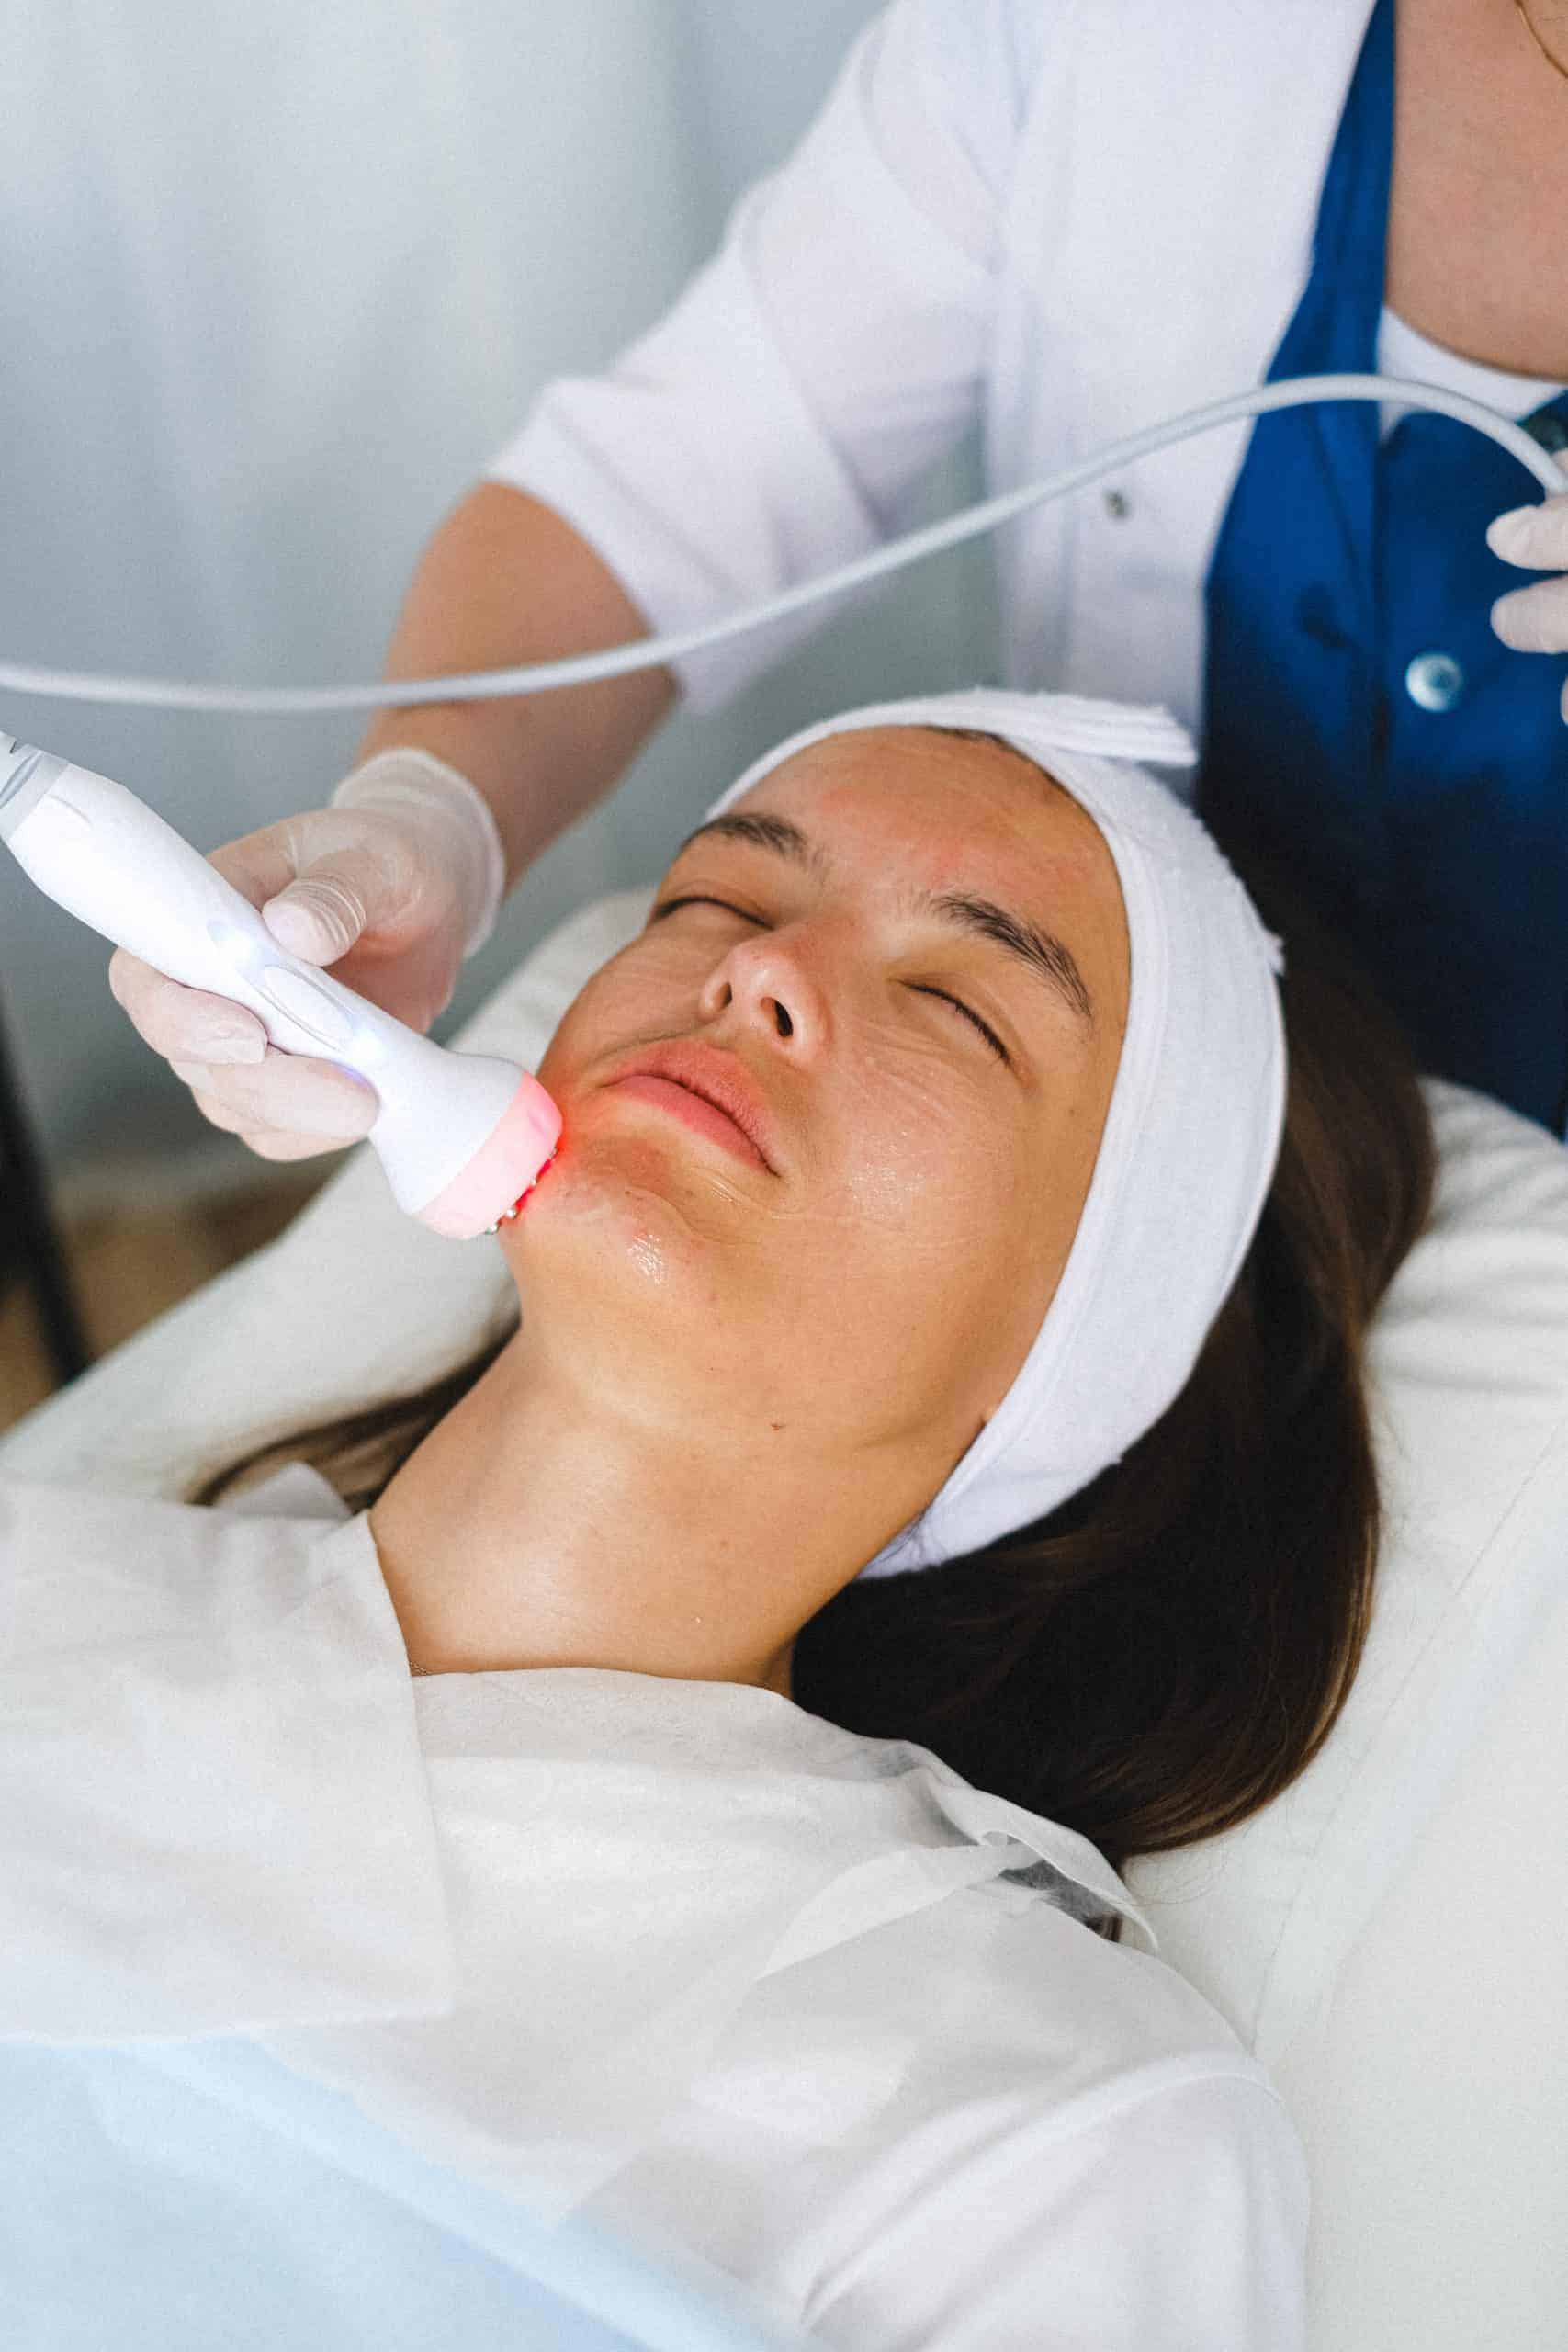 How does fractional laser work? This is important to know before the procedure